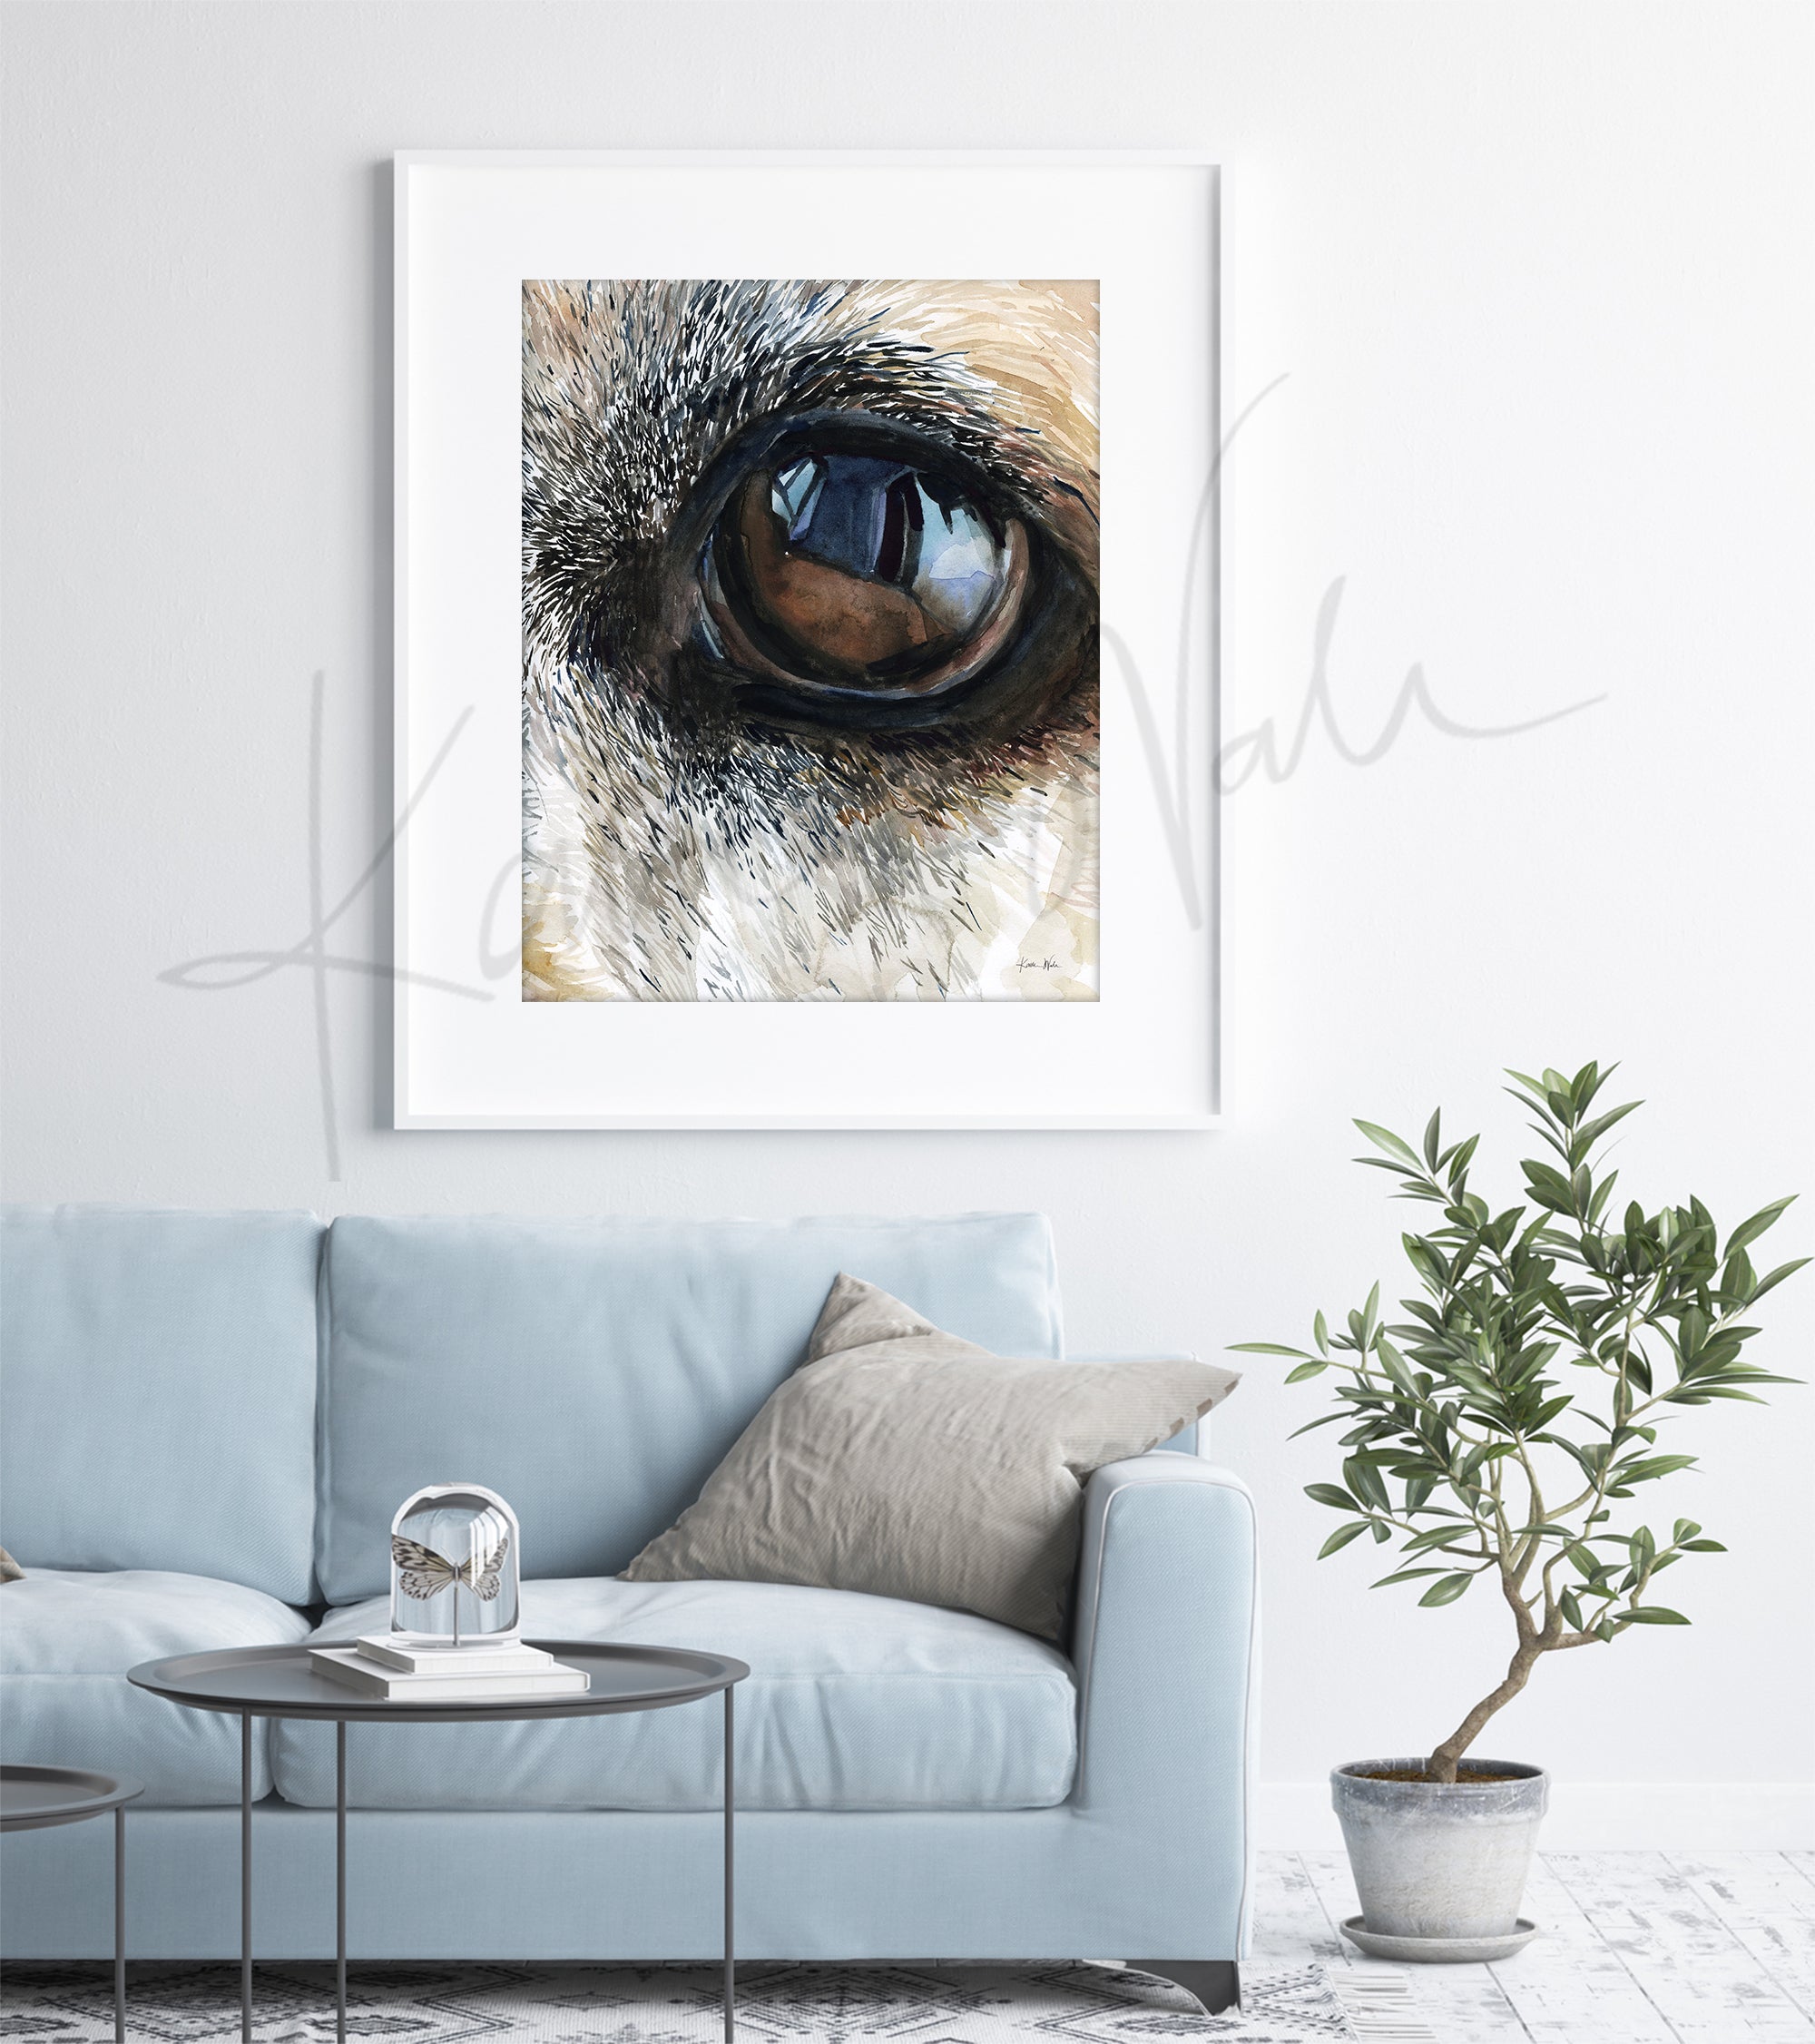 Framed watercolor painting of a zoomed in perspective of a dog’s eye. The painting is in blacks, tans, and browns. The painting is hanging over a blue couch. 